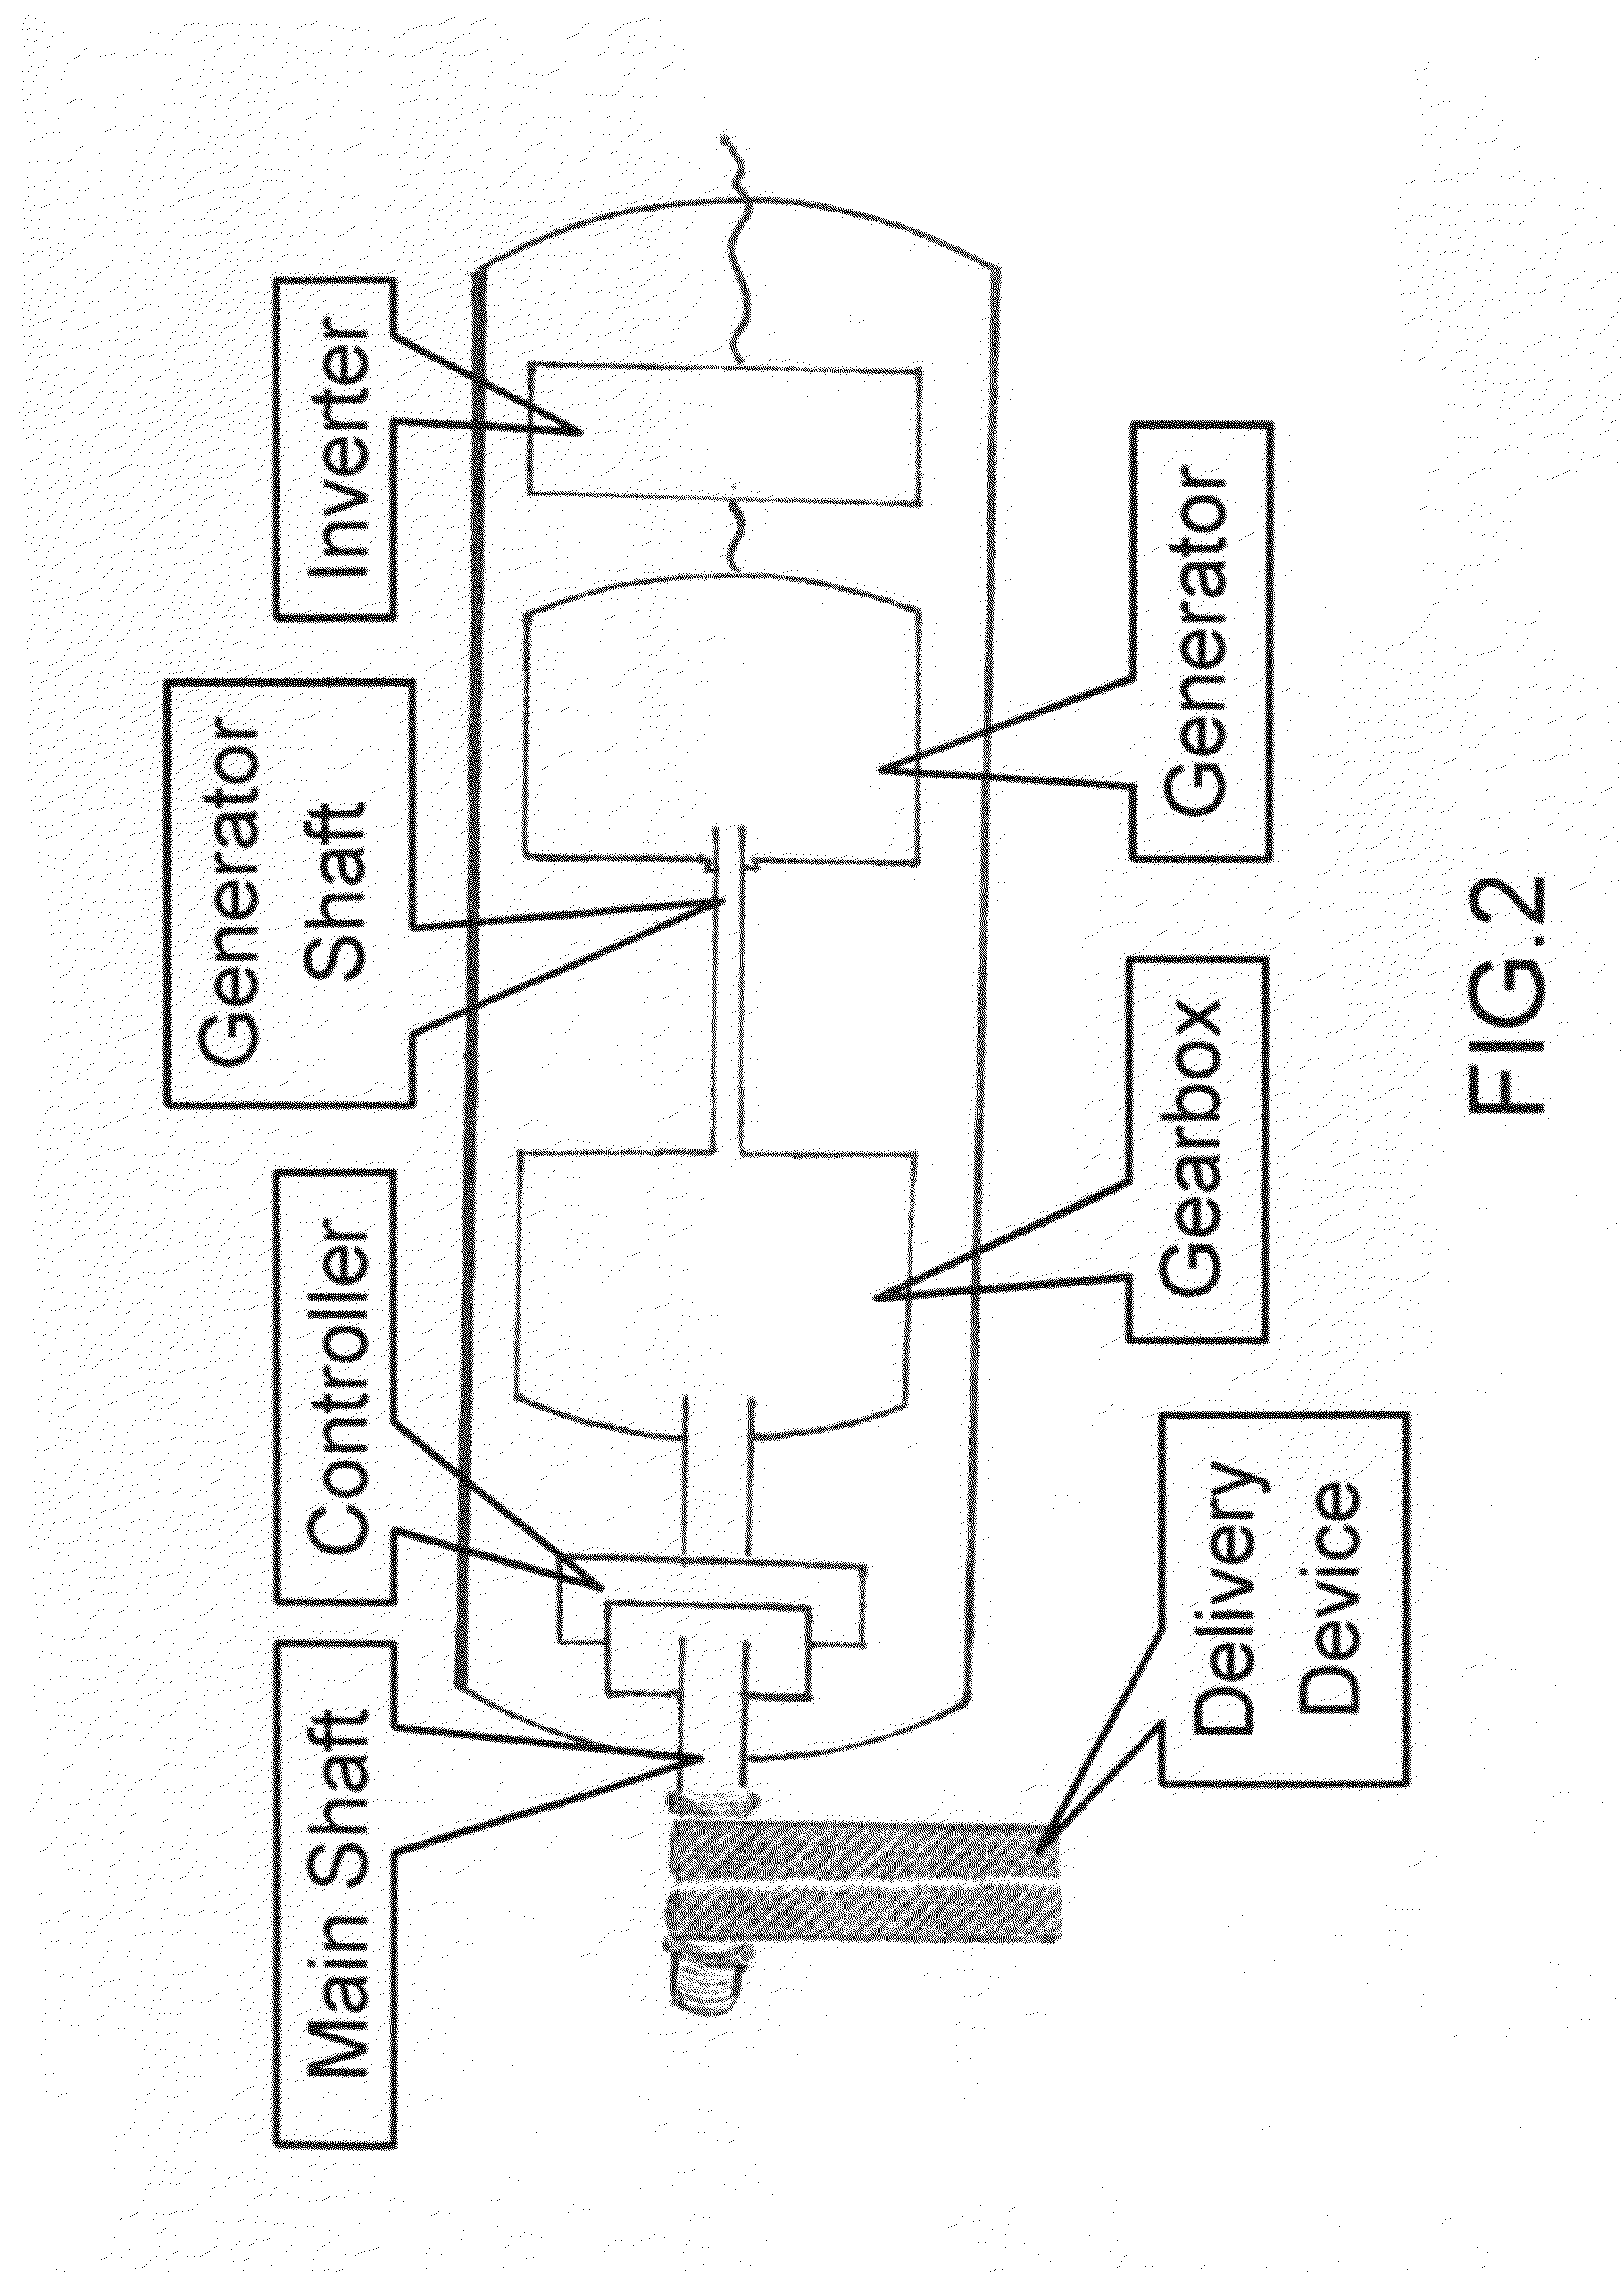 Method for internally generating electric energy in electric vehicles